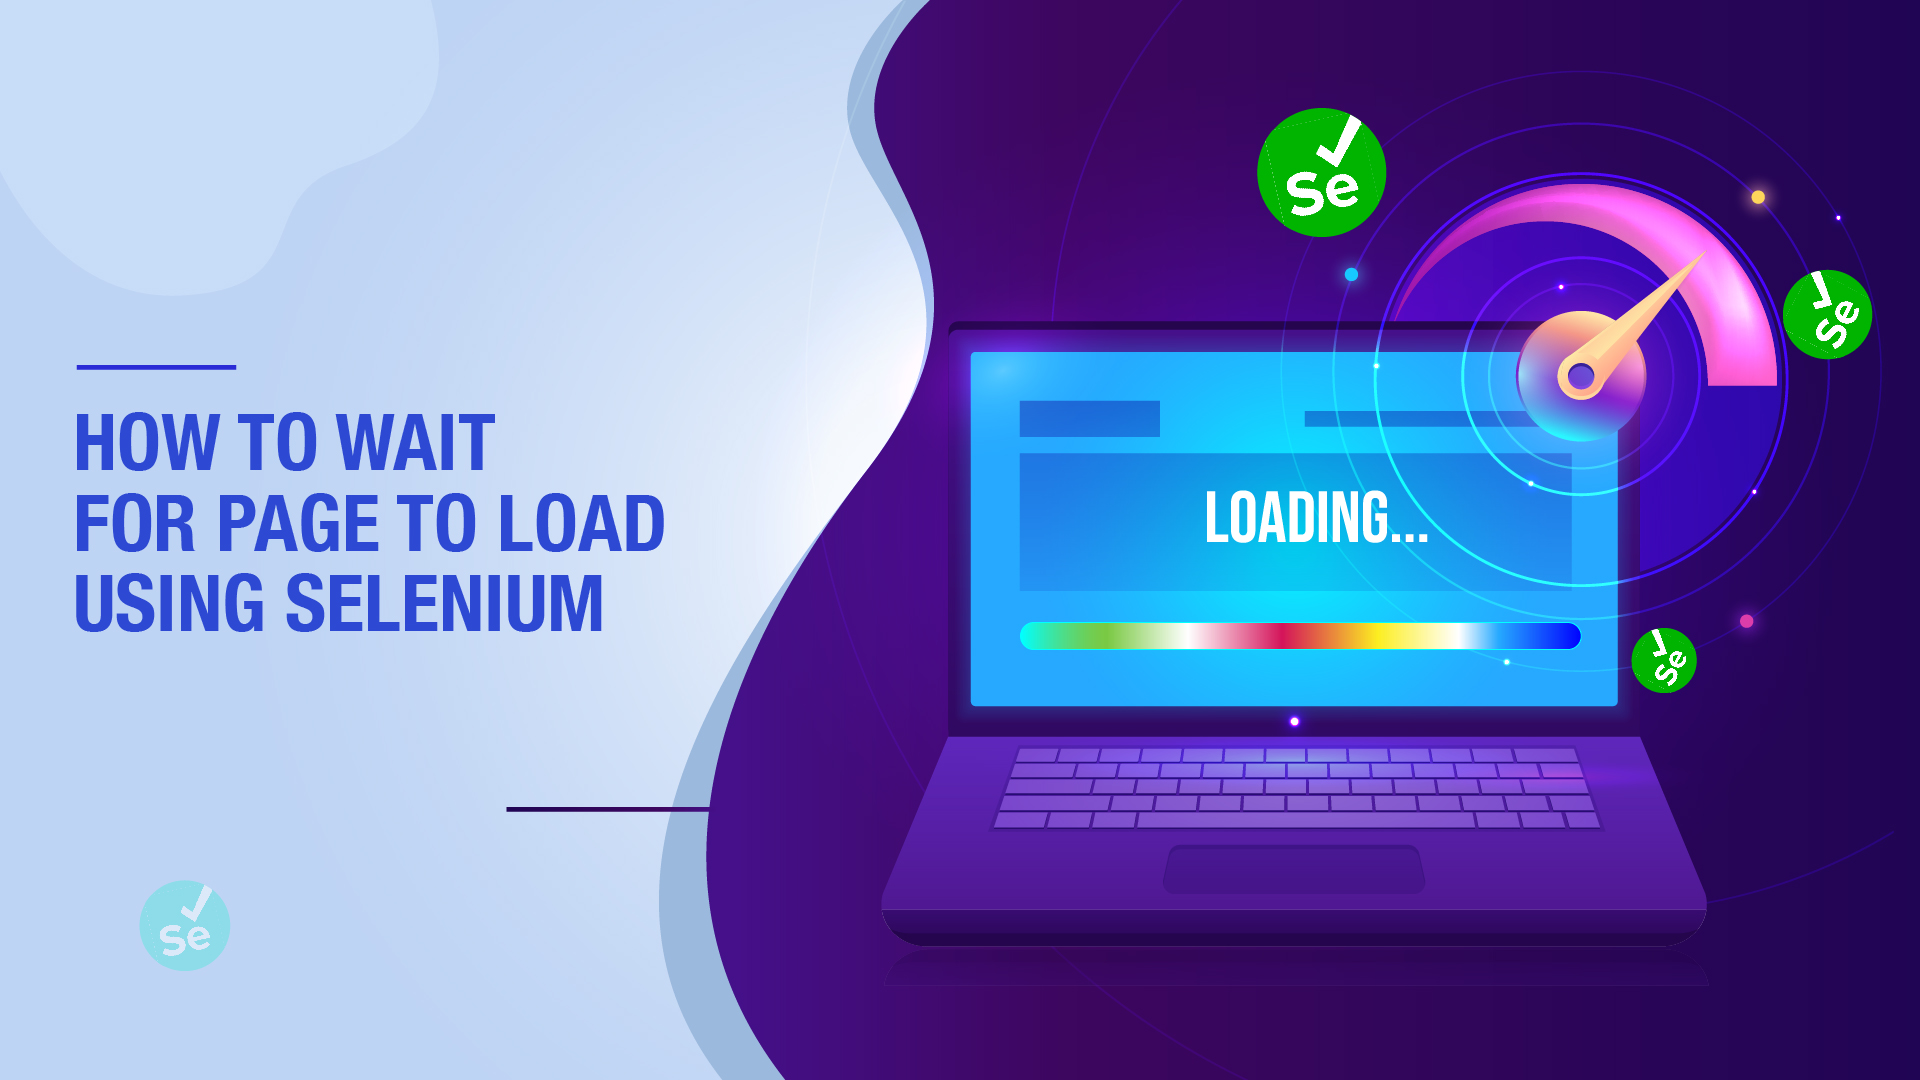 How to Wait For Page to Load using Selenium